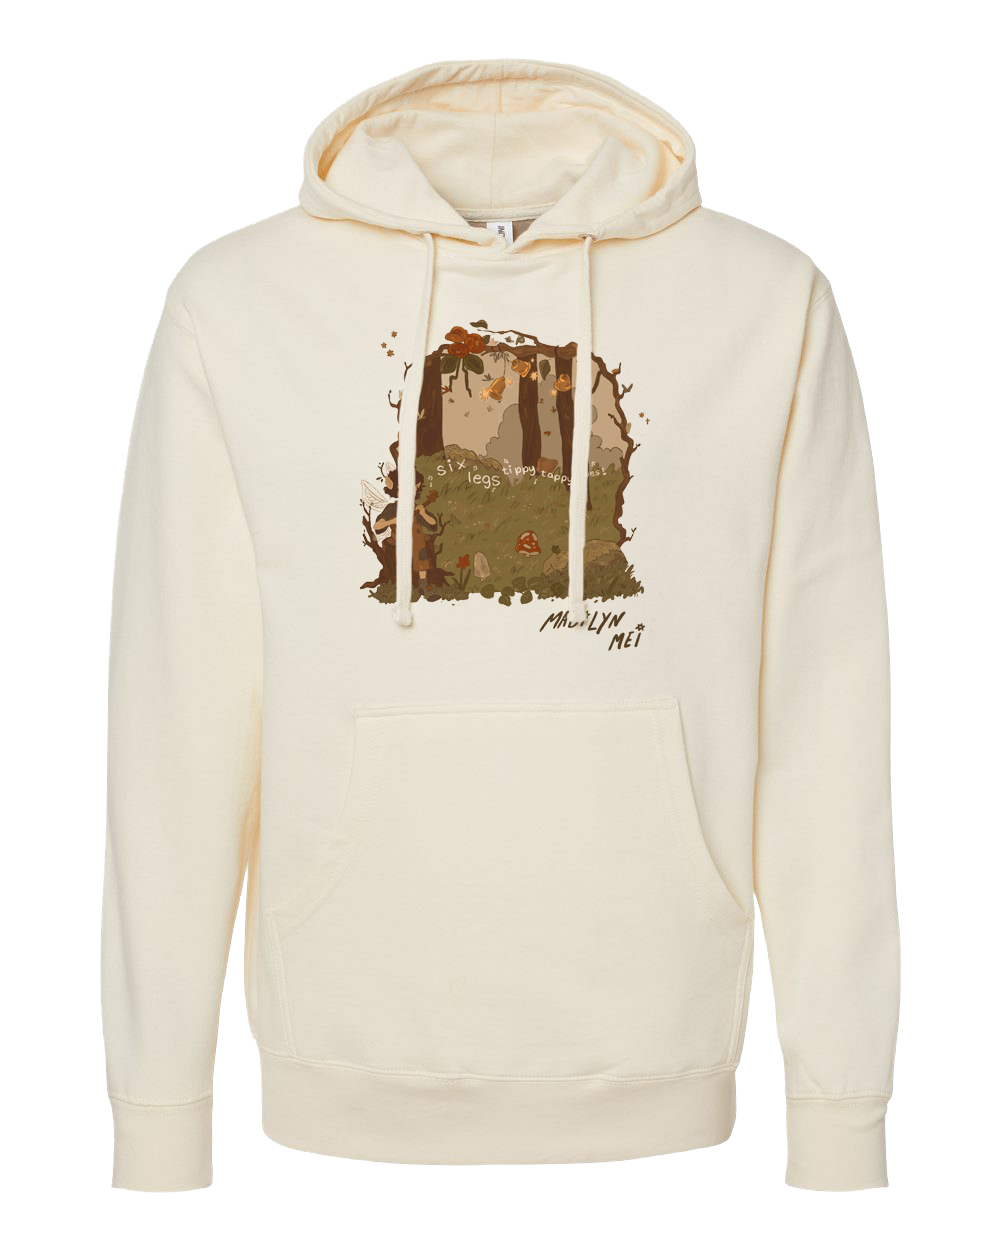 Tippy Tappy Toes Hoodie